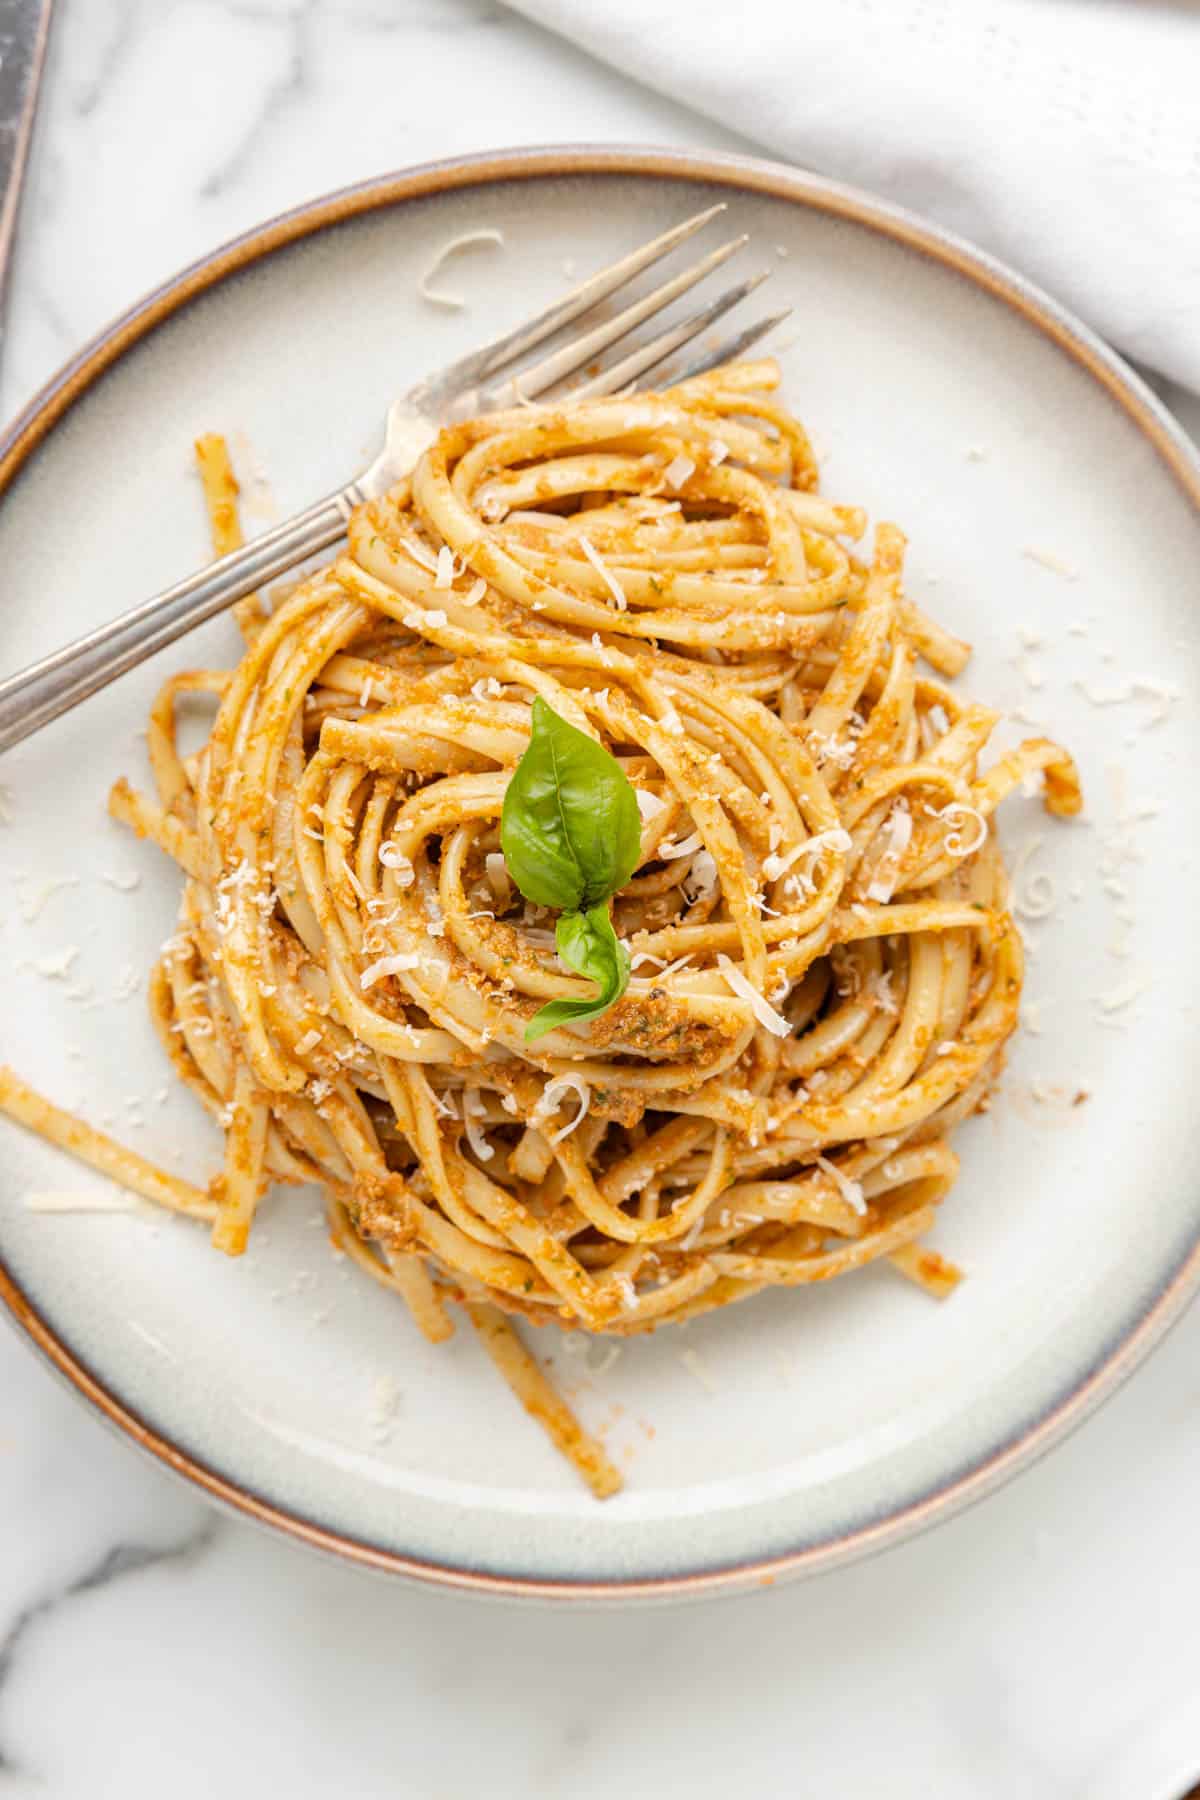 An overhead image of pasta made with sun-dried tomato pesto.